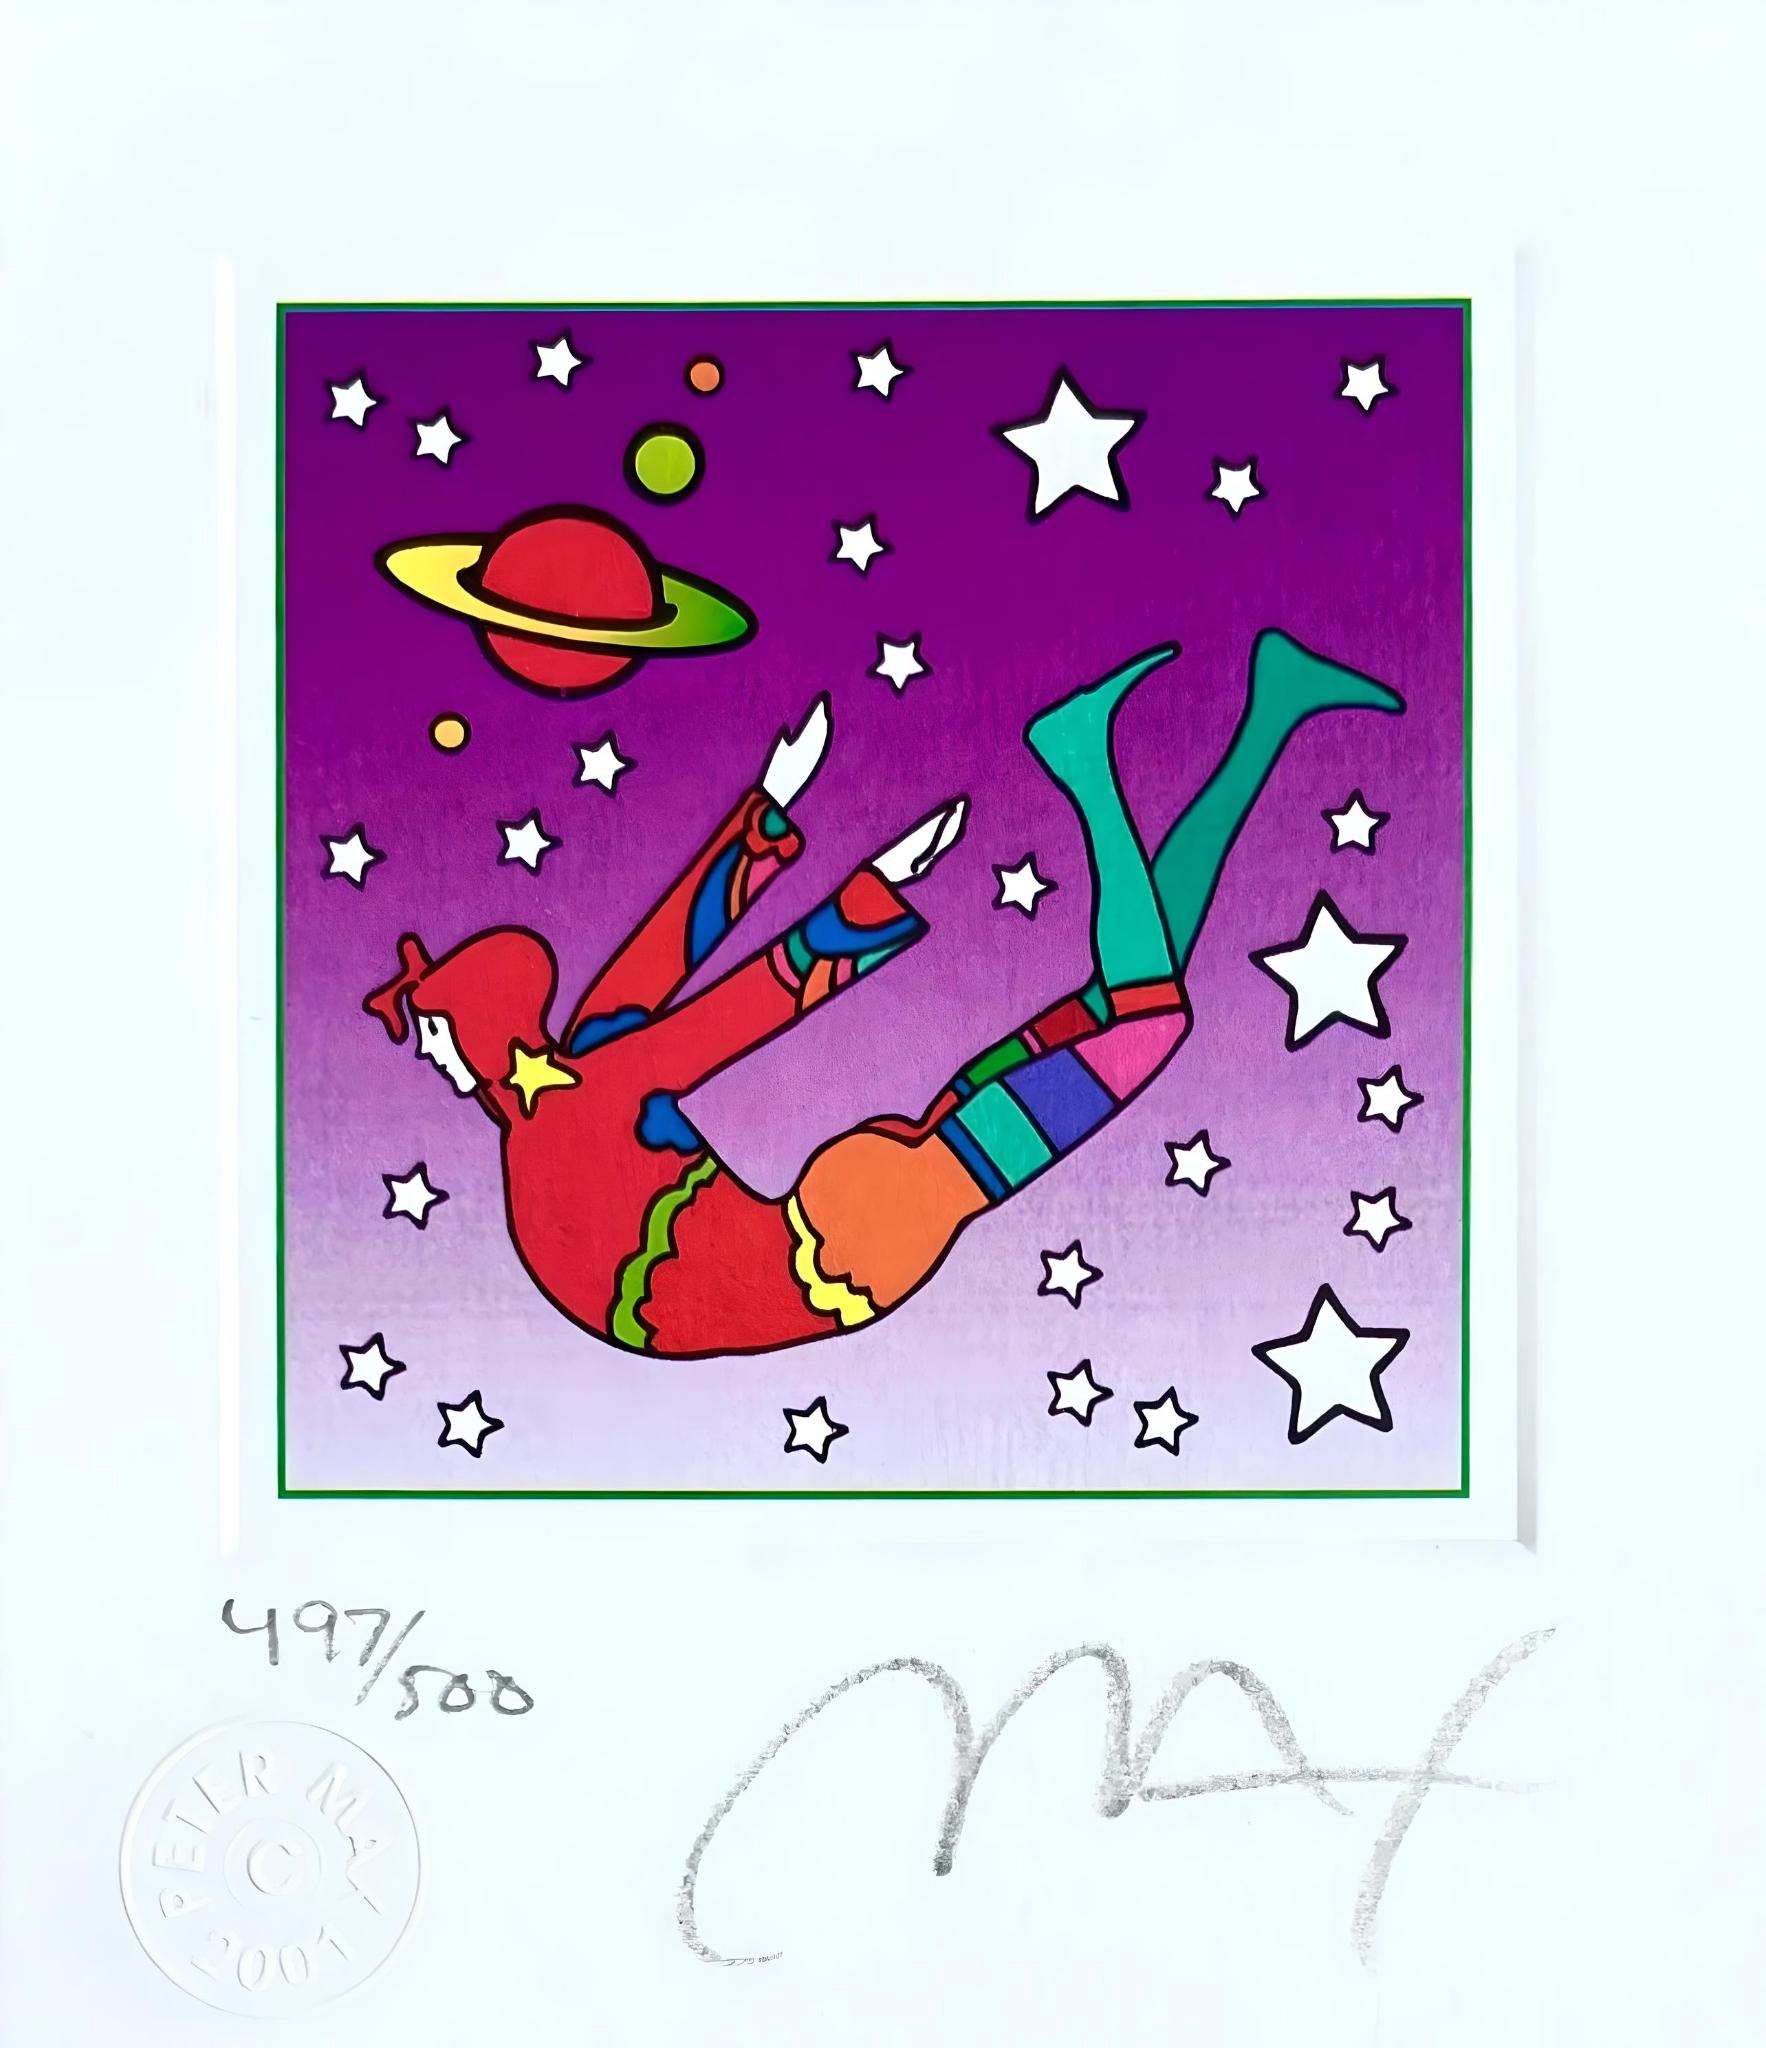 Artist: Peter Max (1937)
Title: Cosmic Flyer in Space
Year: 2003
Edition: 497/500, plus proofs
Medium: Lithograph on Lustro Saxony paper
Size: 3.43 x 2.62 inches
Condition: Excellent
Inscription: Signed and numbered by the artist.
Notes: Published